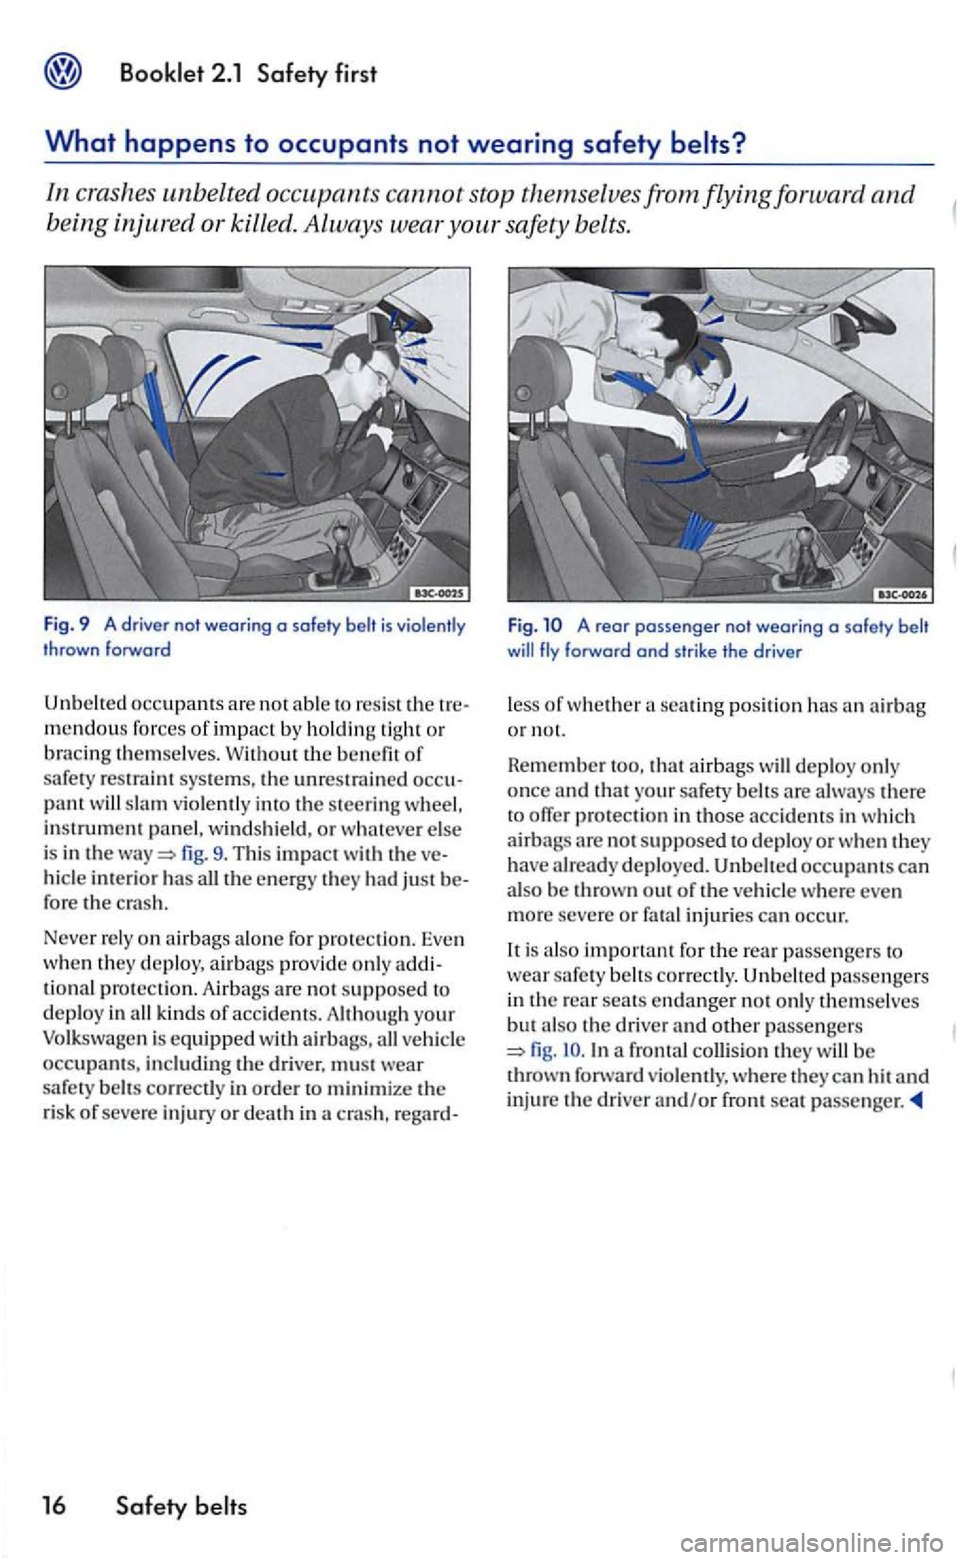 VOLKSWAGEN GOLF 2007  Owners Manual In crashes  unbelted  occupants cannot stop themse lvesfromflyingforward and 
b eing  injured  or killed.  Always  wear safety belts. 
Fig . 9  A driver  not wearing o  safety belt is violen tly 
t hr